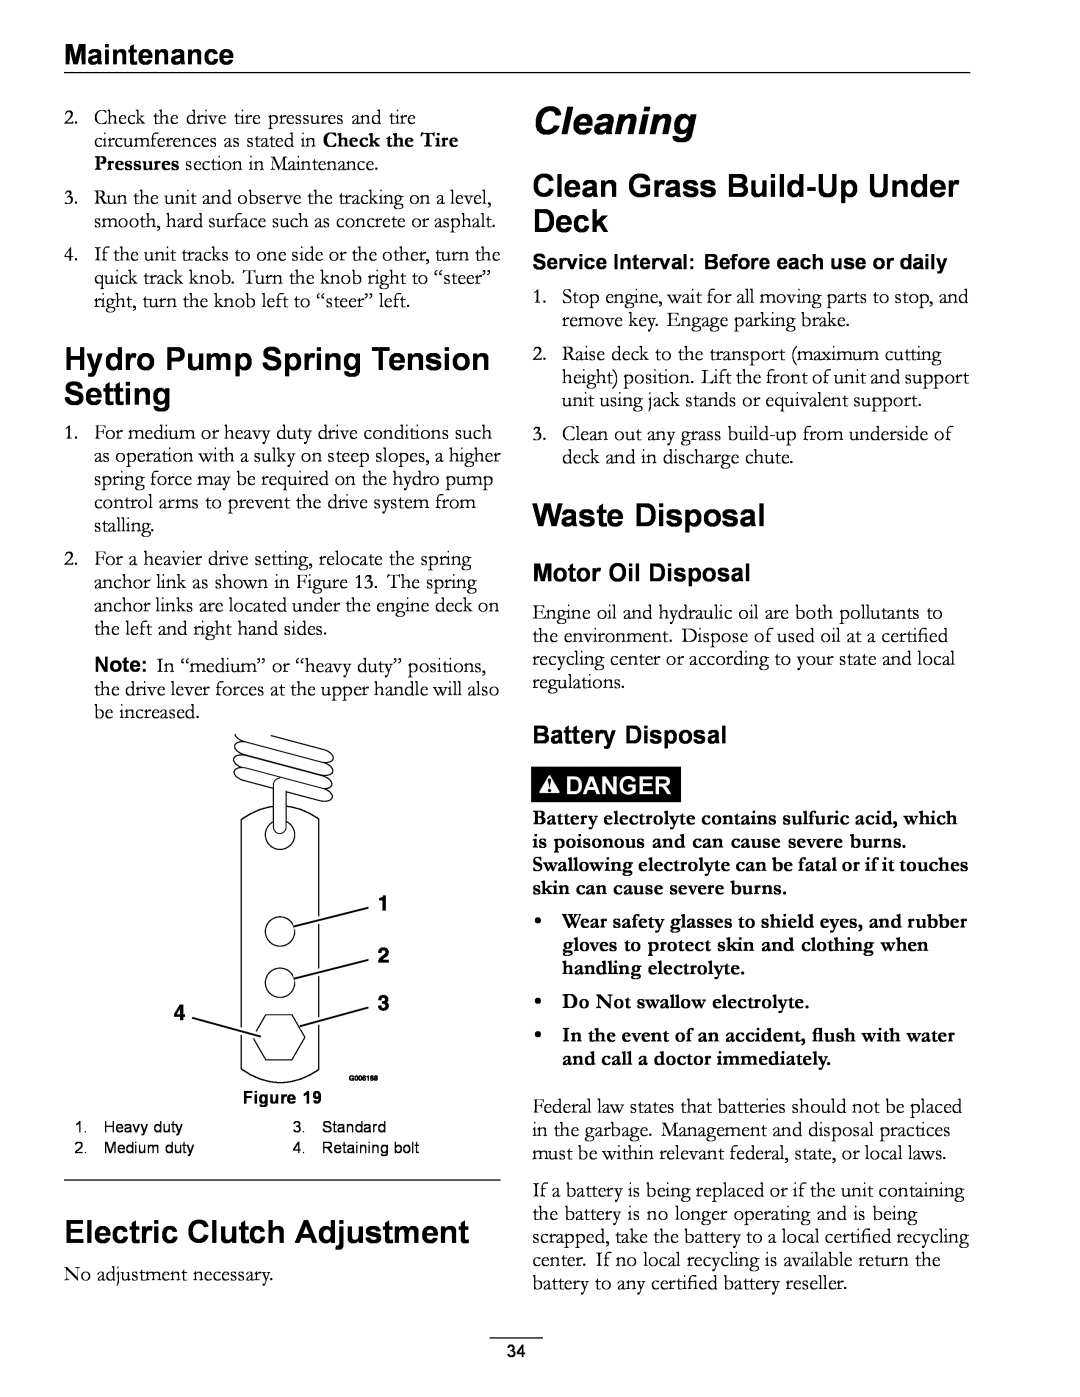 Exmark 4500-528 Cleaning, Hydro Pump Spring Tension Setting, Electric Clutch Adjustment, Clean Grass Build-Up Under Deck 